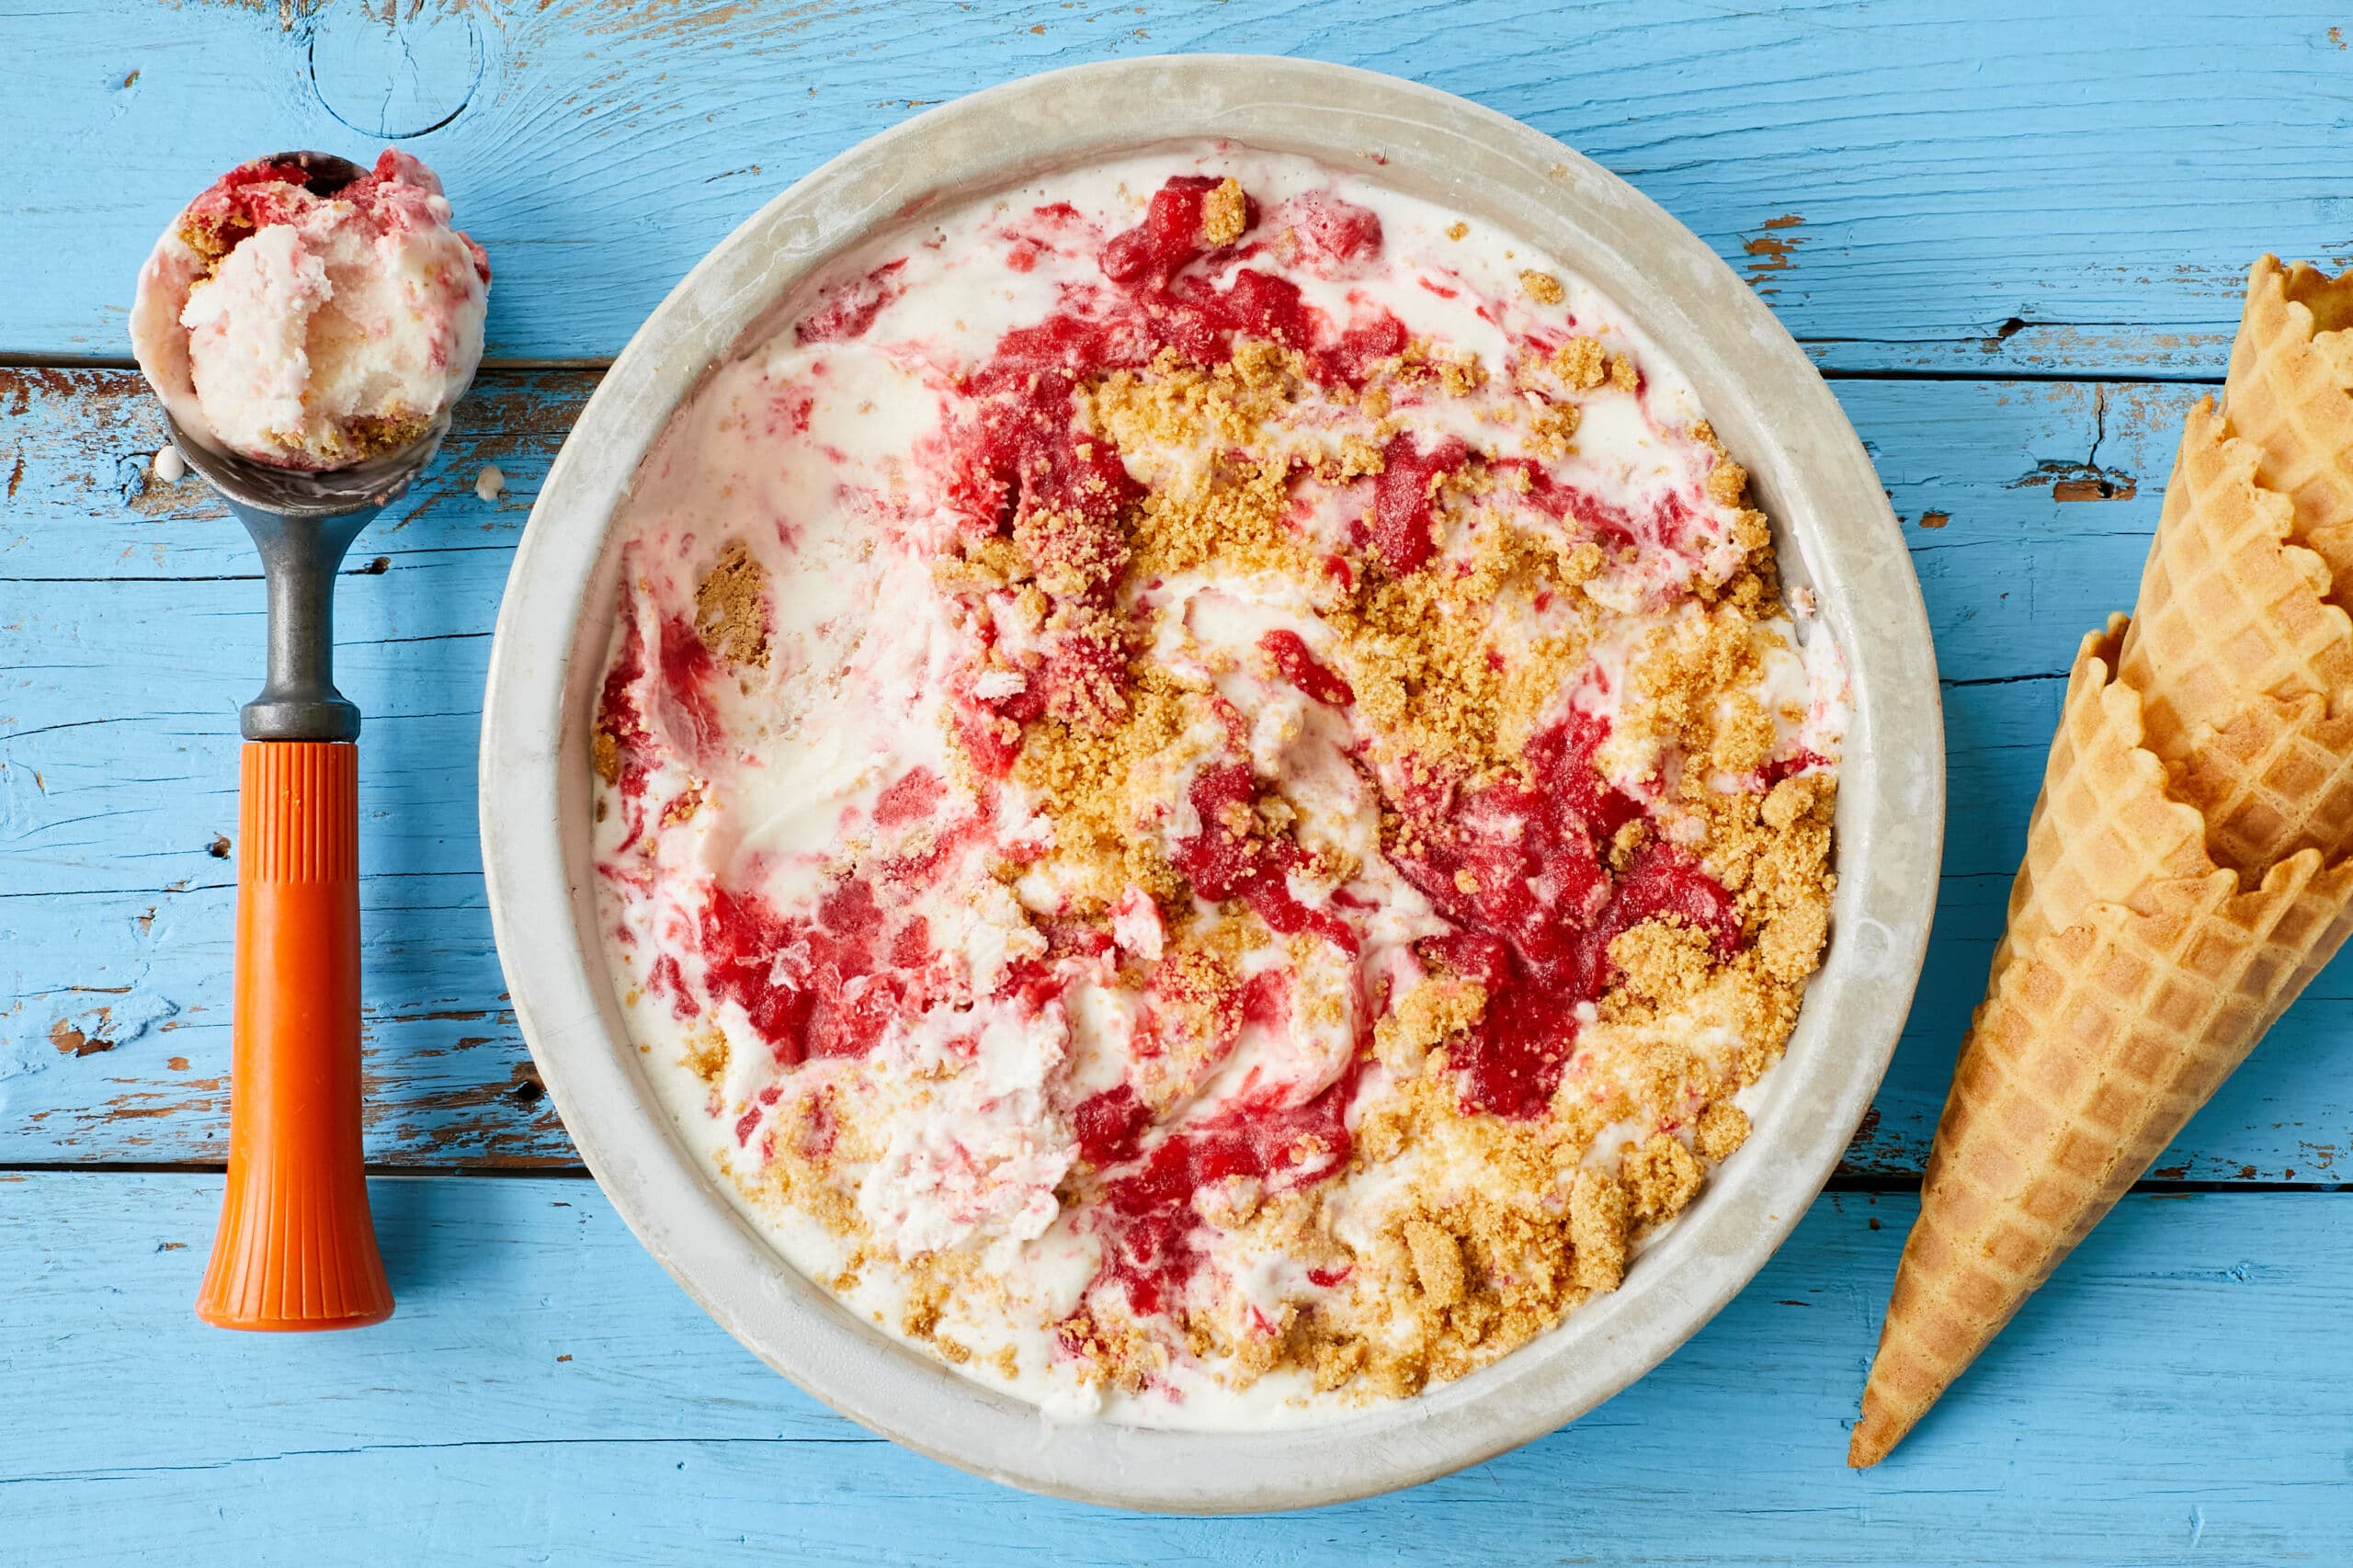 An over-head shot of a bowl of Strawberry Cheesecake Ice Cream shows the creamy, thick ice cream with swirls of jammy strawberries and chunks of buttery Graham cracker crust. An ice cream scoop is on the left side and an ice cream cone is on the right.